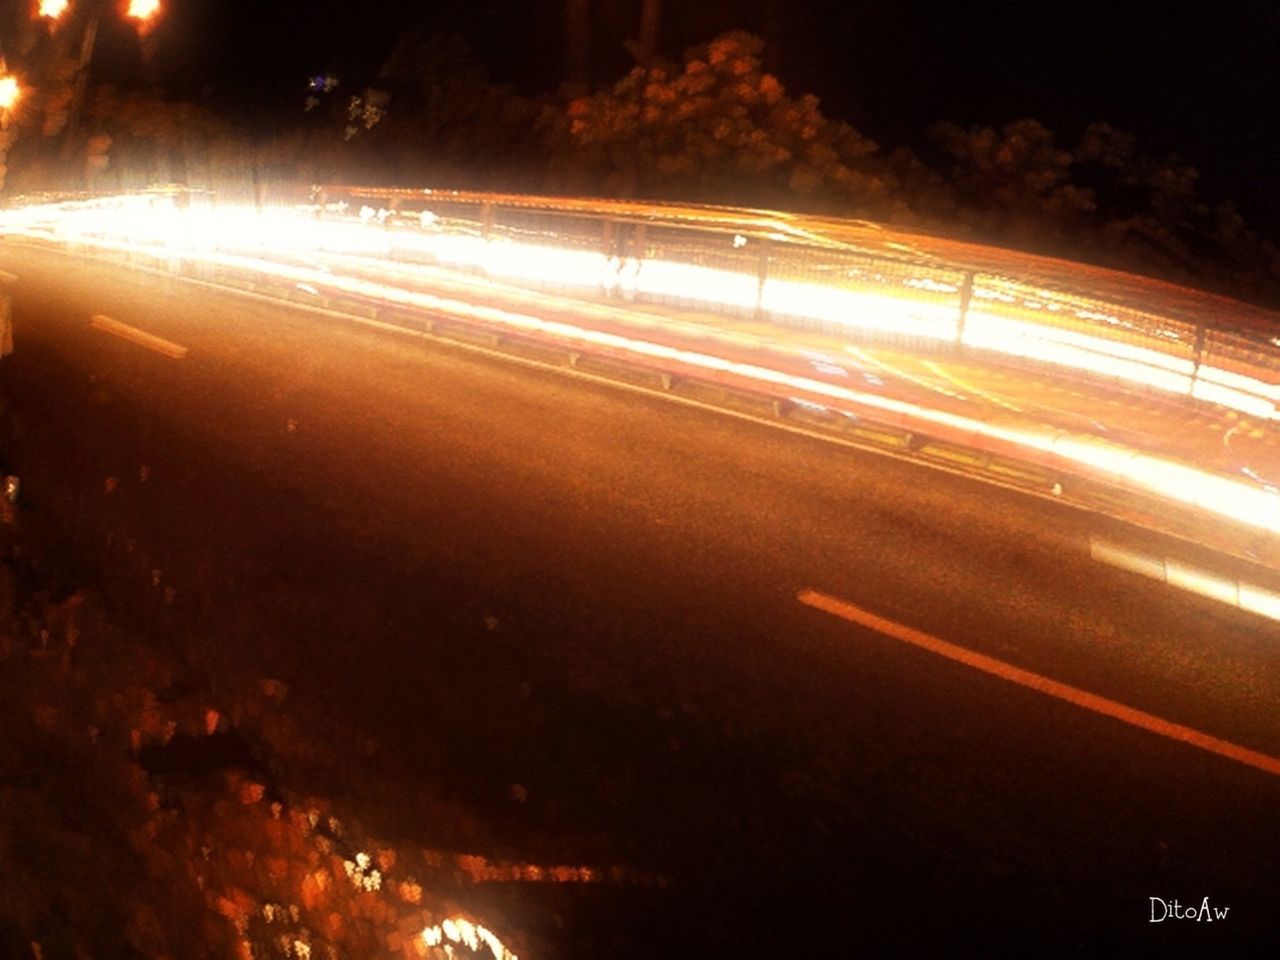 night, illuminated, road, transportation, long exposure, street, light trail, motion, city, light - natural phenomenon, speed, car, blurred motion, sky, street light, high angle view, outdoors, no people, road marking, glowing